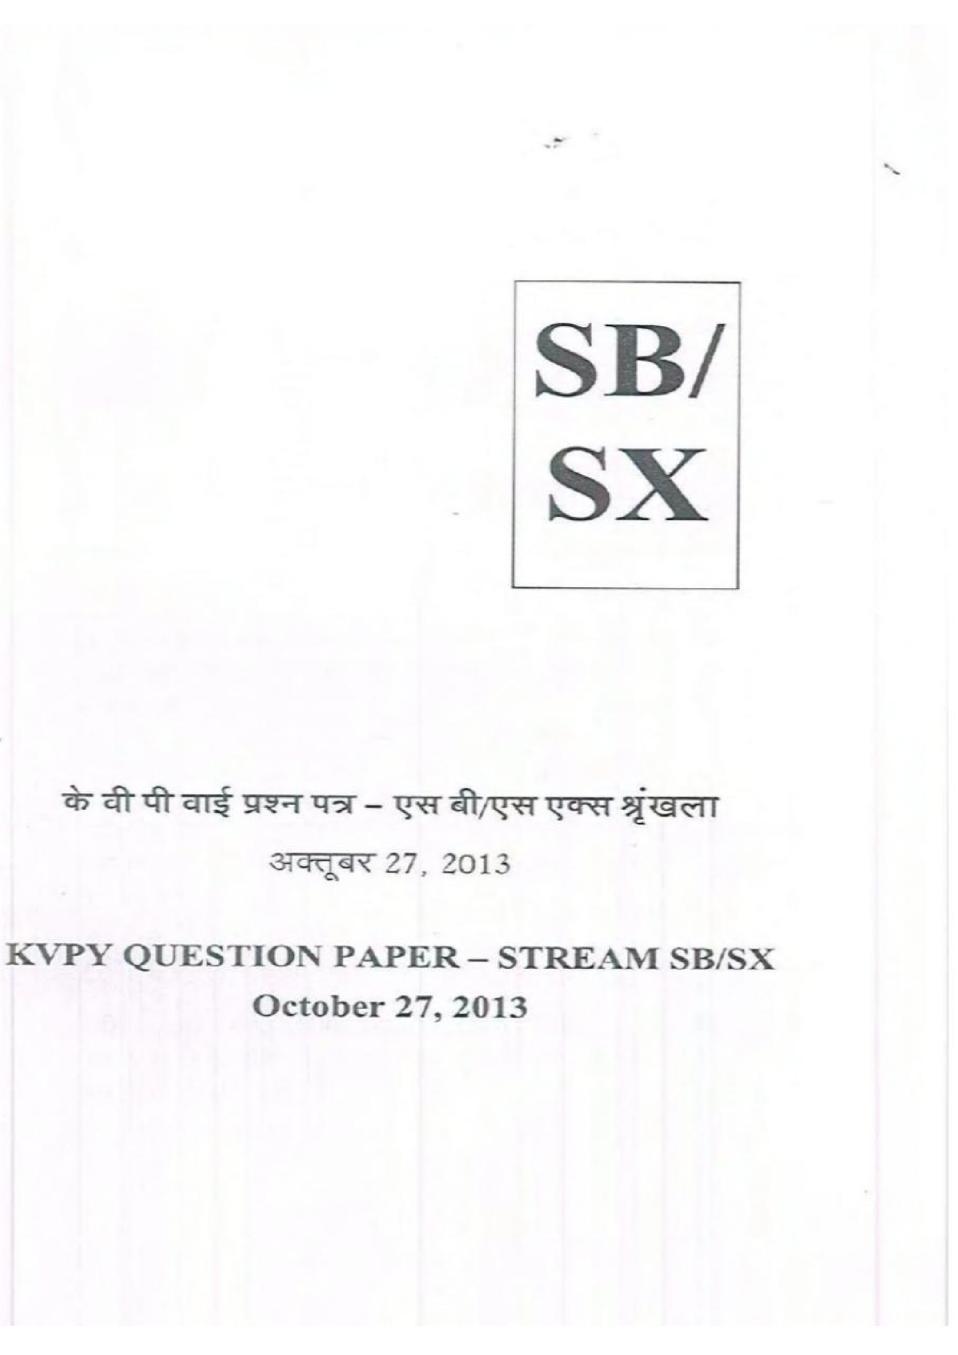 KVPY 2013 Question Paper with Answer Key for SB/SX Stream (Hindi Version) - Page 1